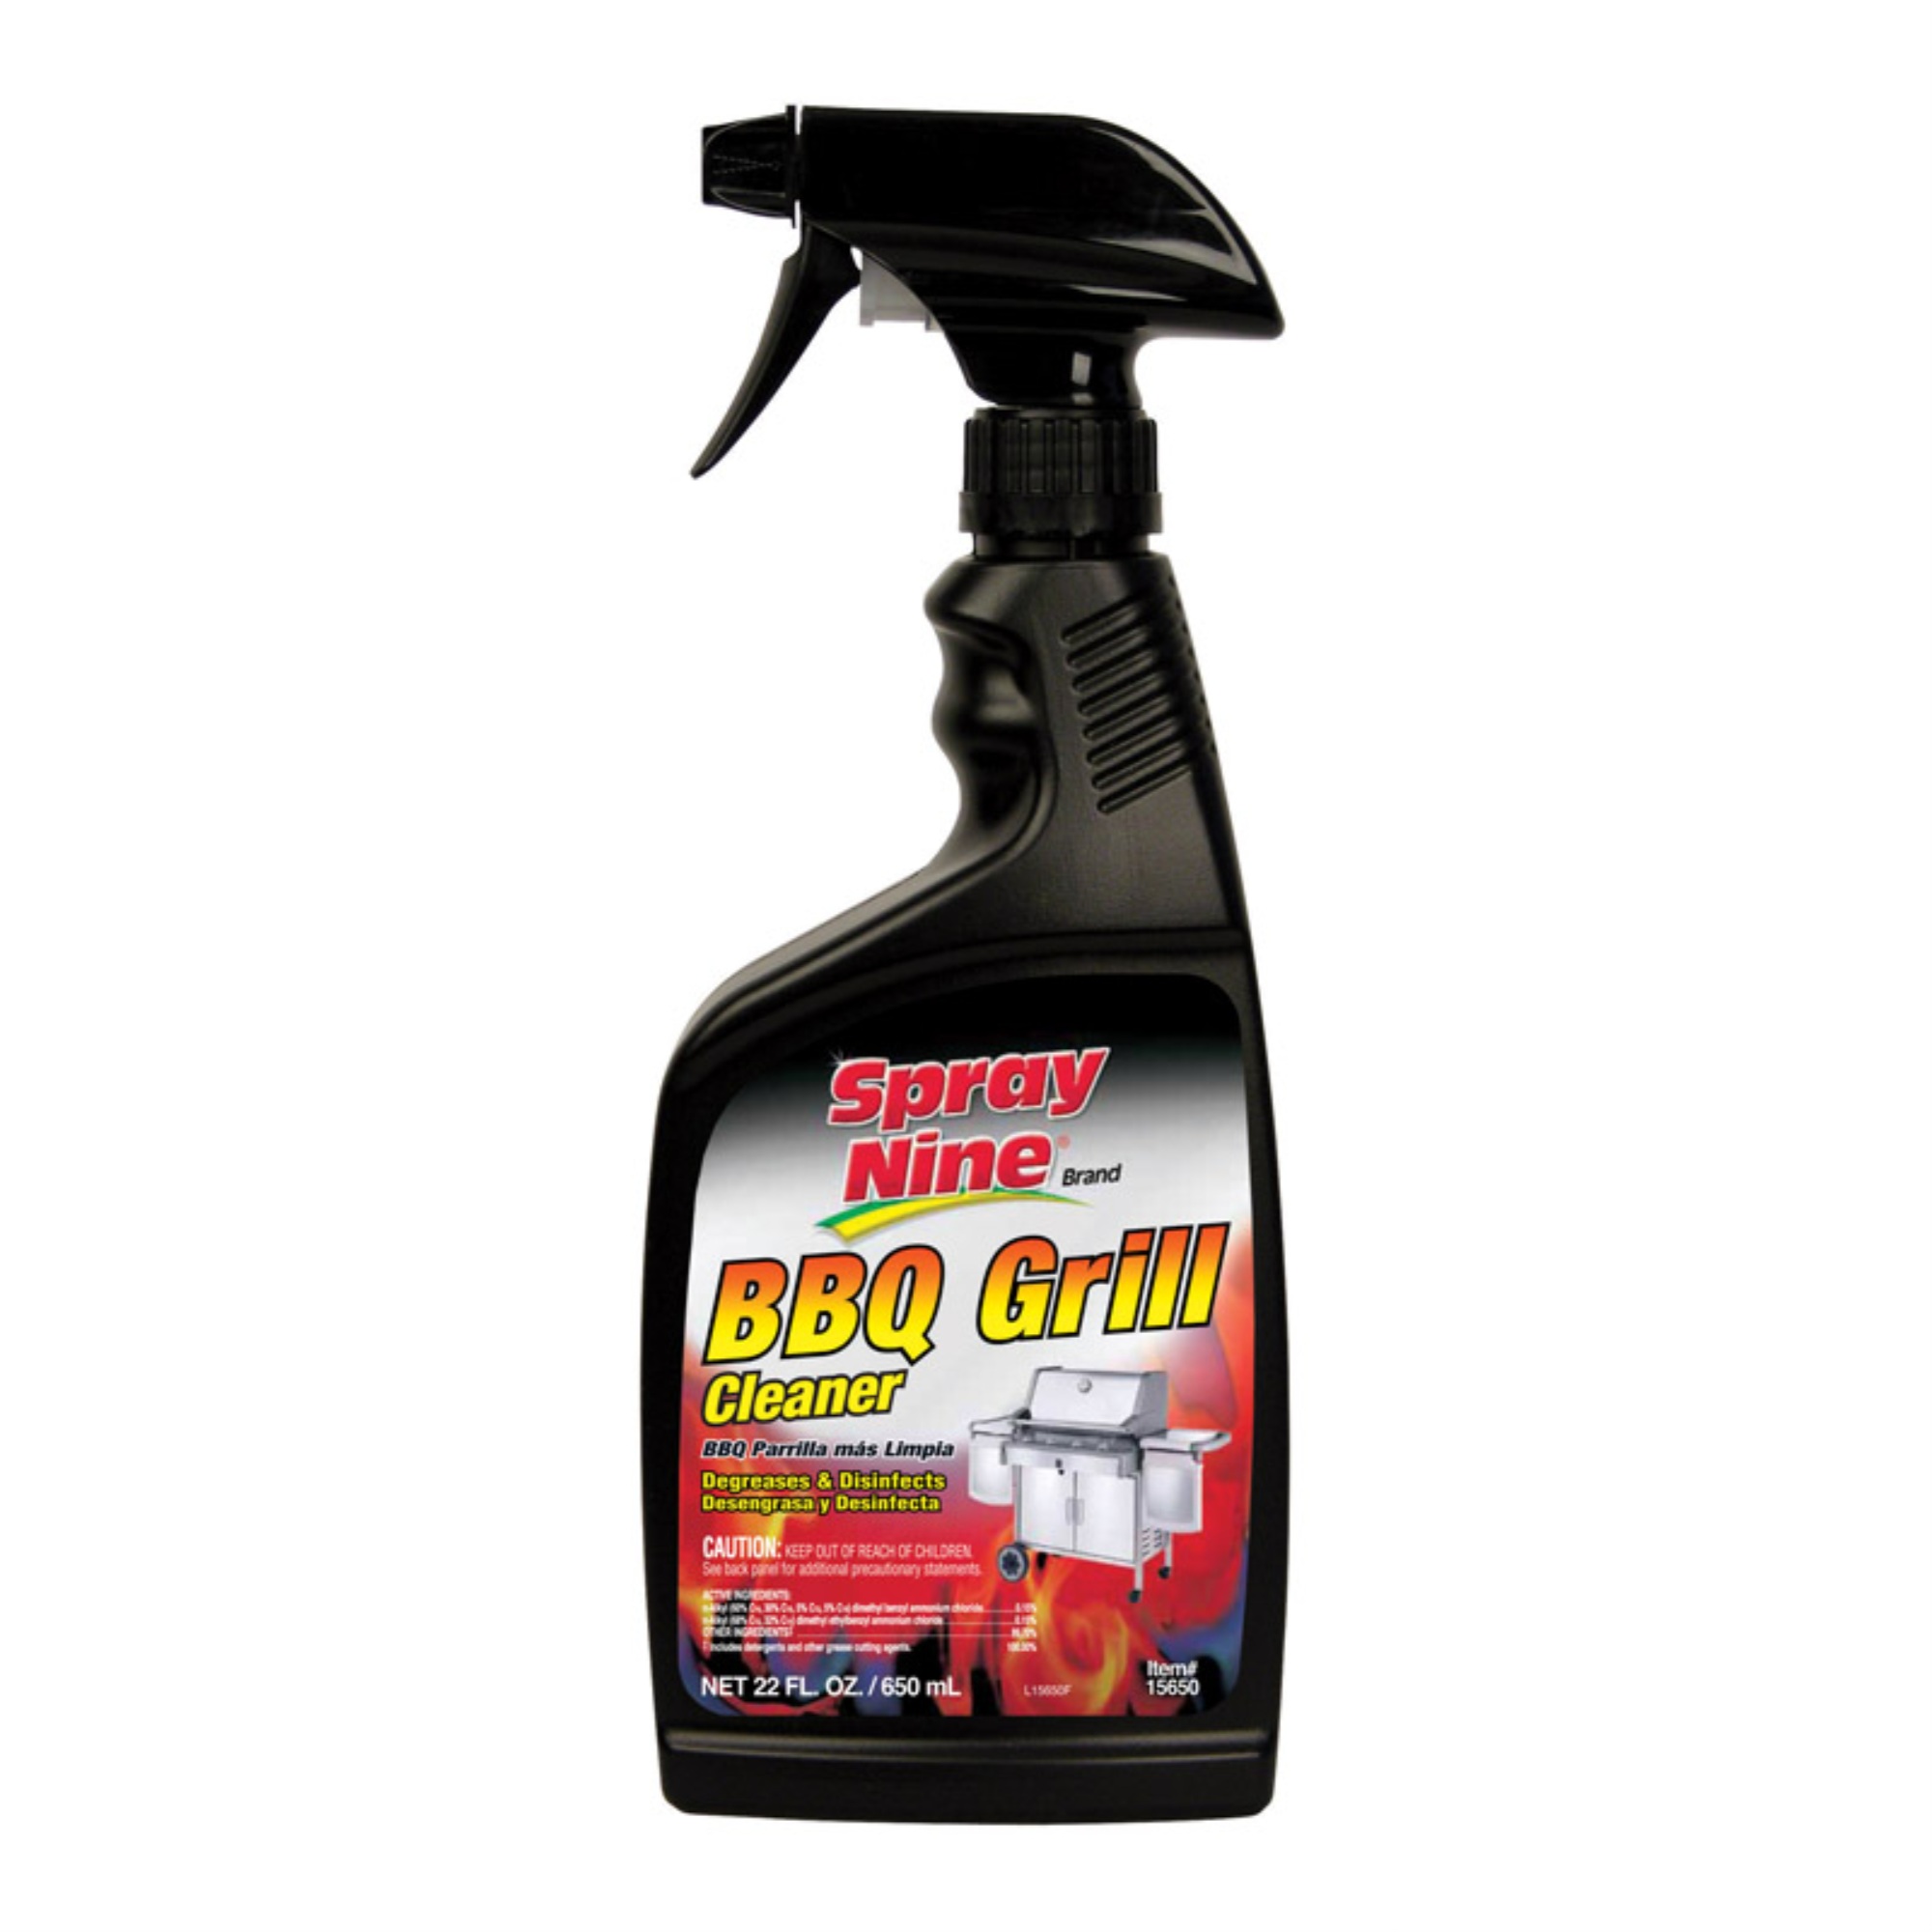 Spray Nine 15650 Barbeque Grill Cleaner, 22 oz. - image 1 of 2